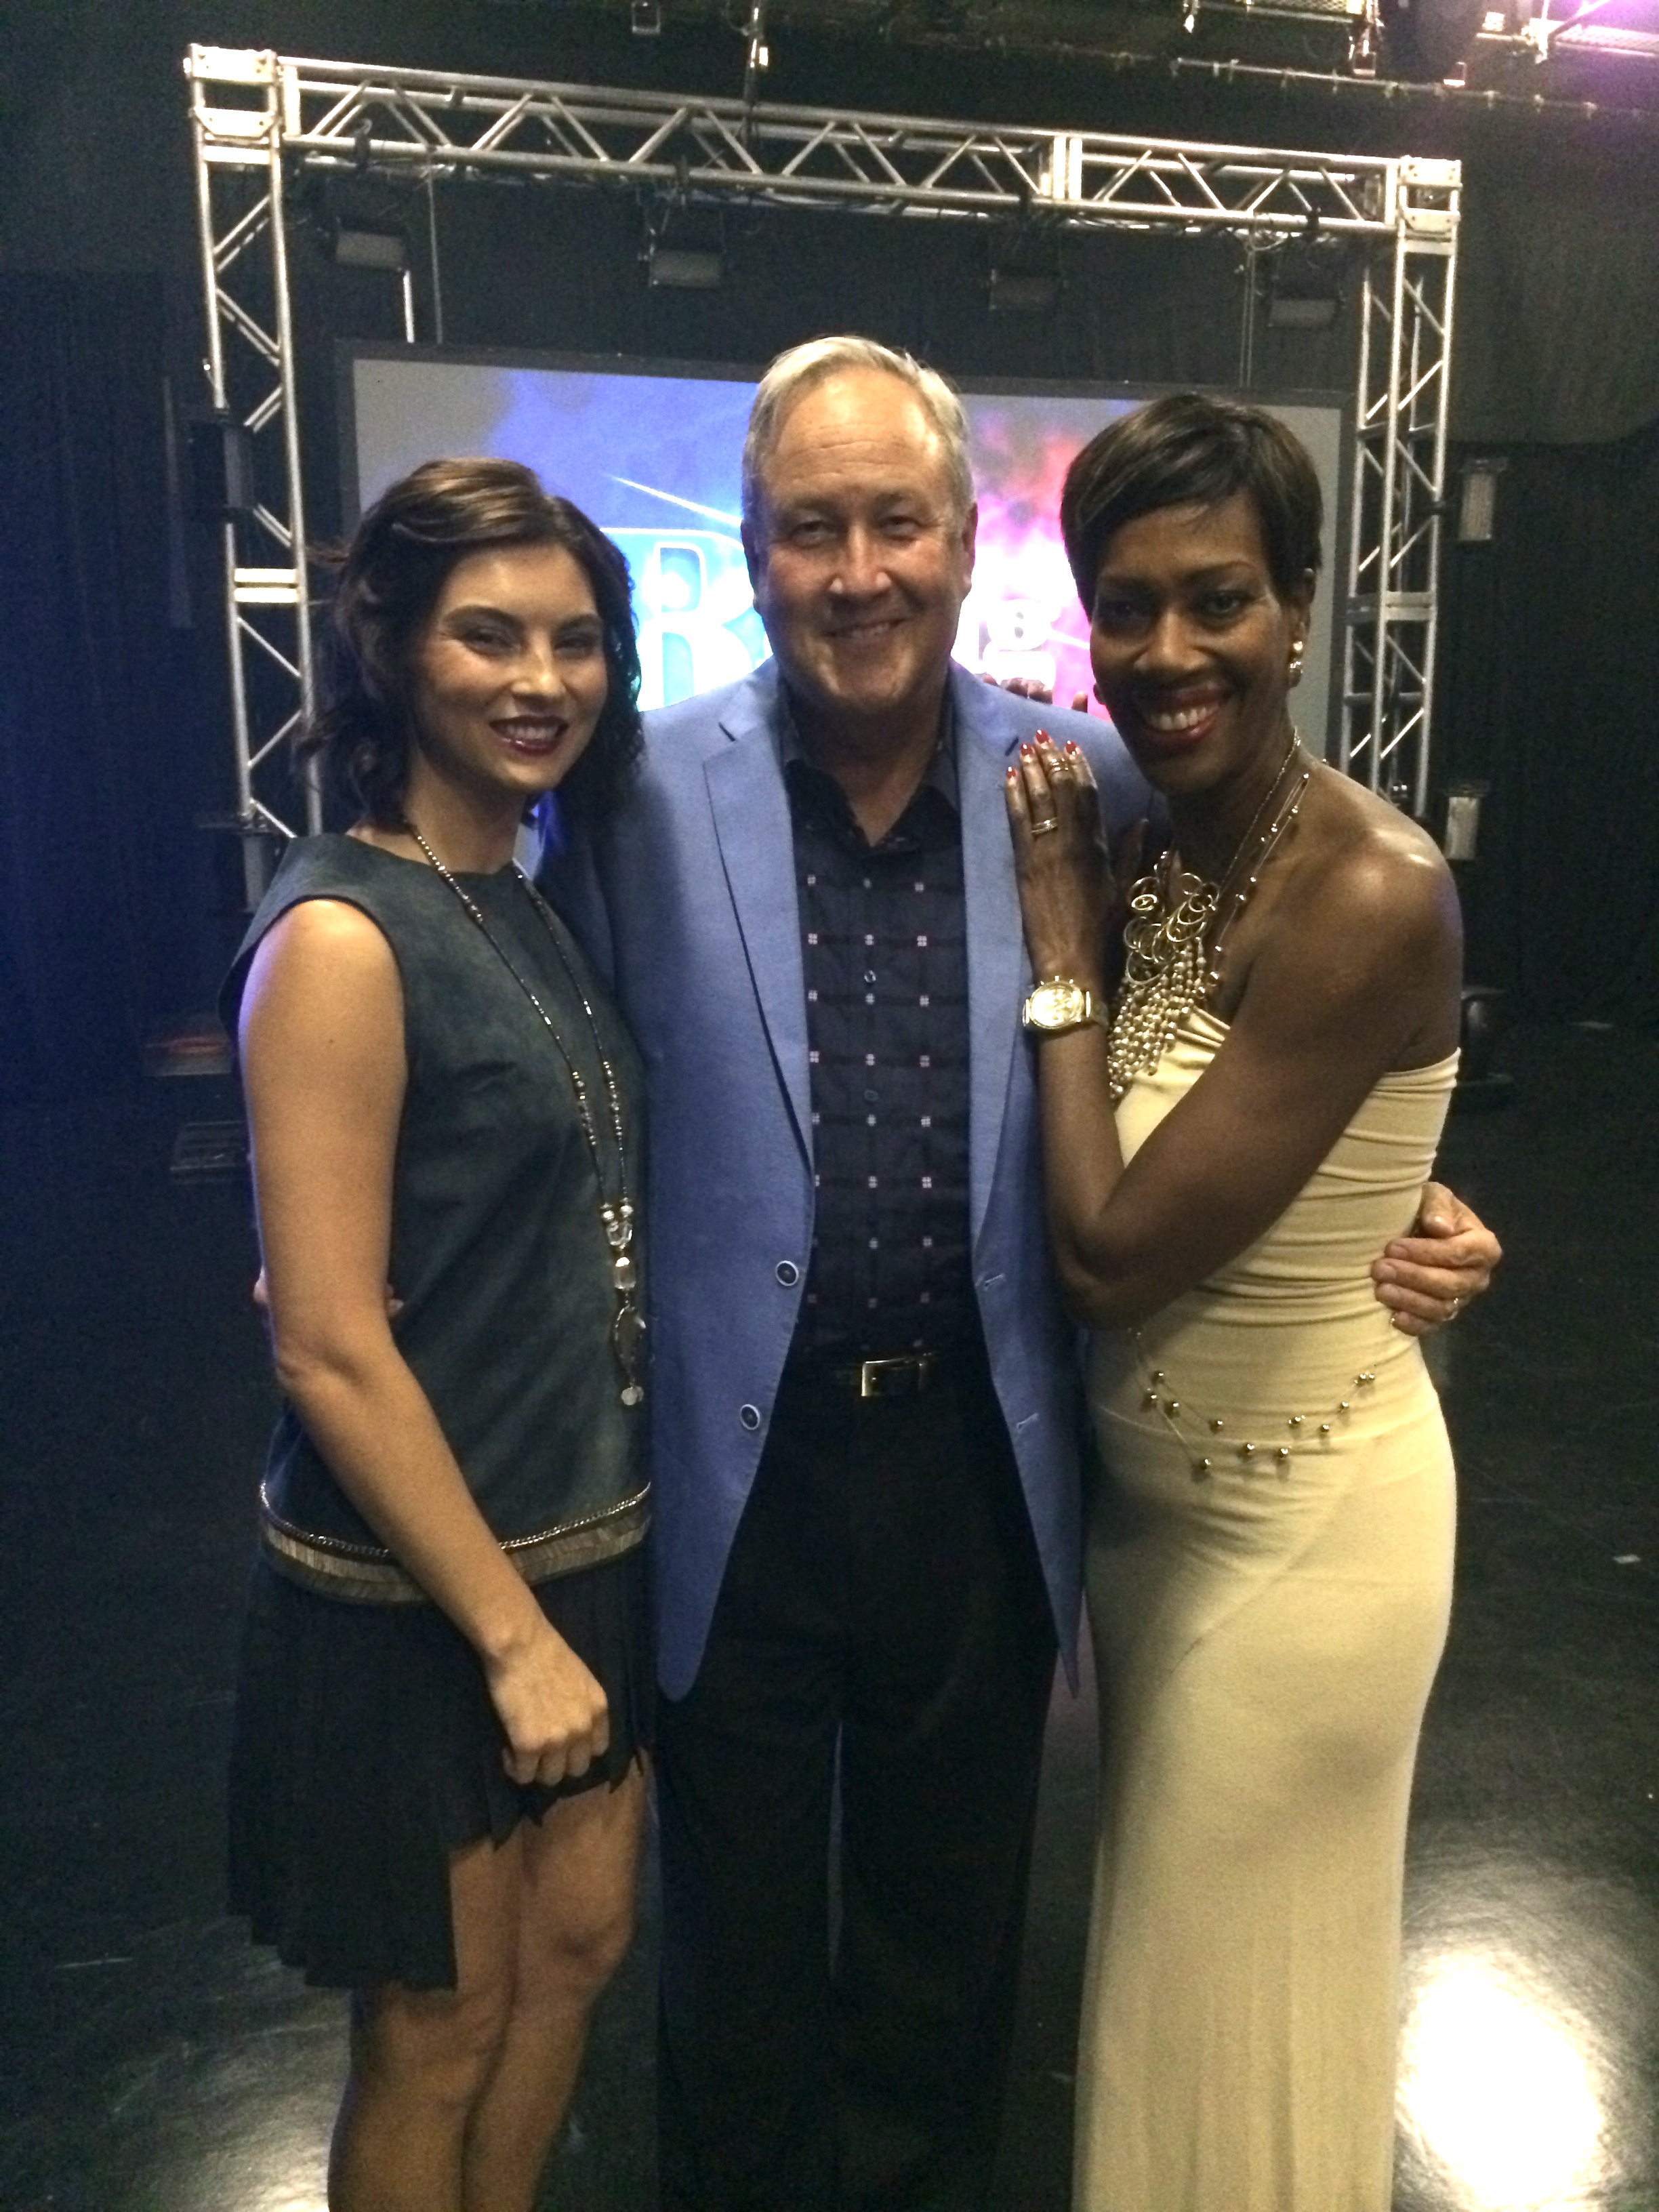 Mike Wargo on the set of Michiana's Rising Star with Season 2 co-hosts Kortnye Hurst and Dawn Yarbrough.